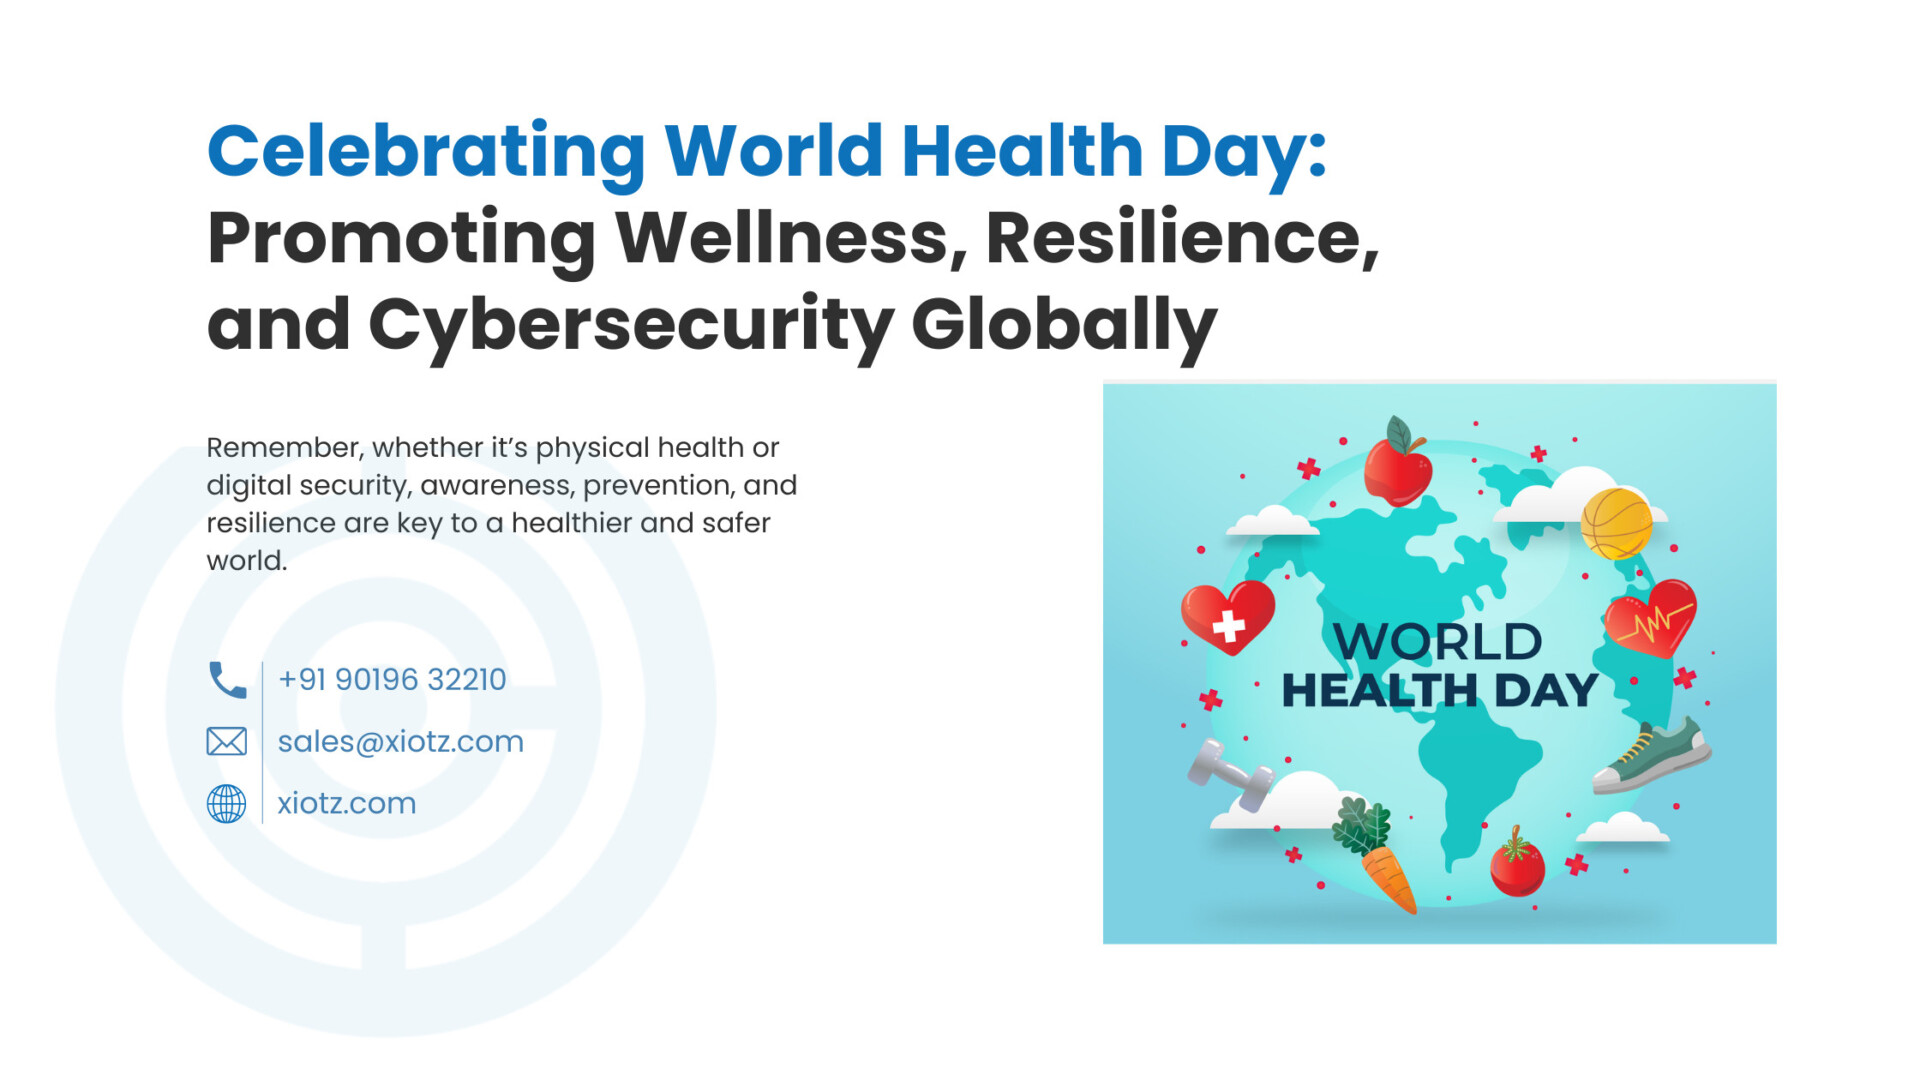 Celebrating World Health Day: Promoting Wellness, Resilience, and Cybersecurity Globally